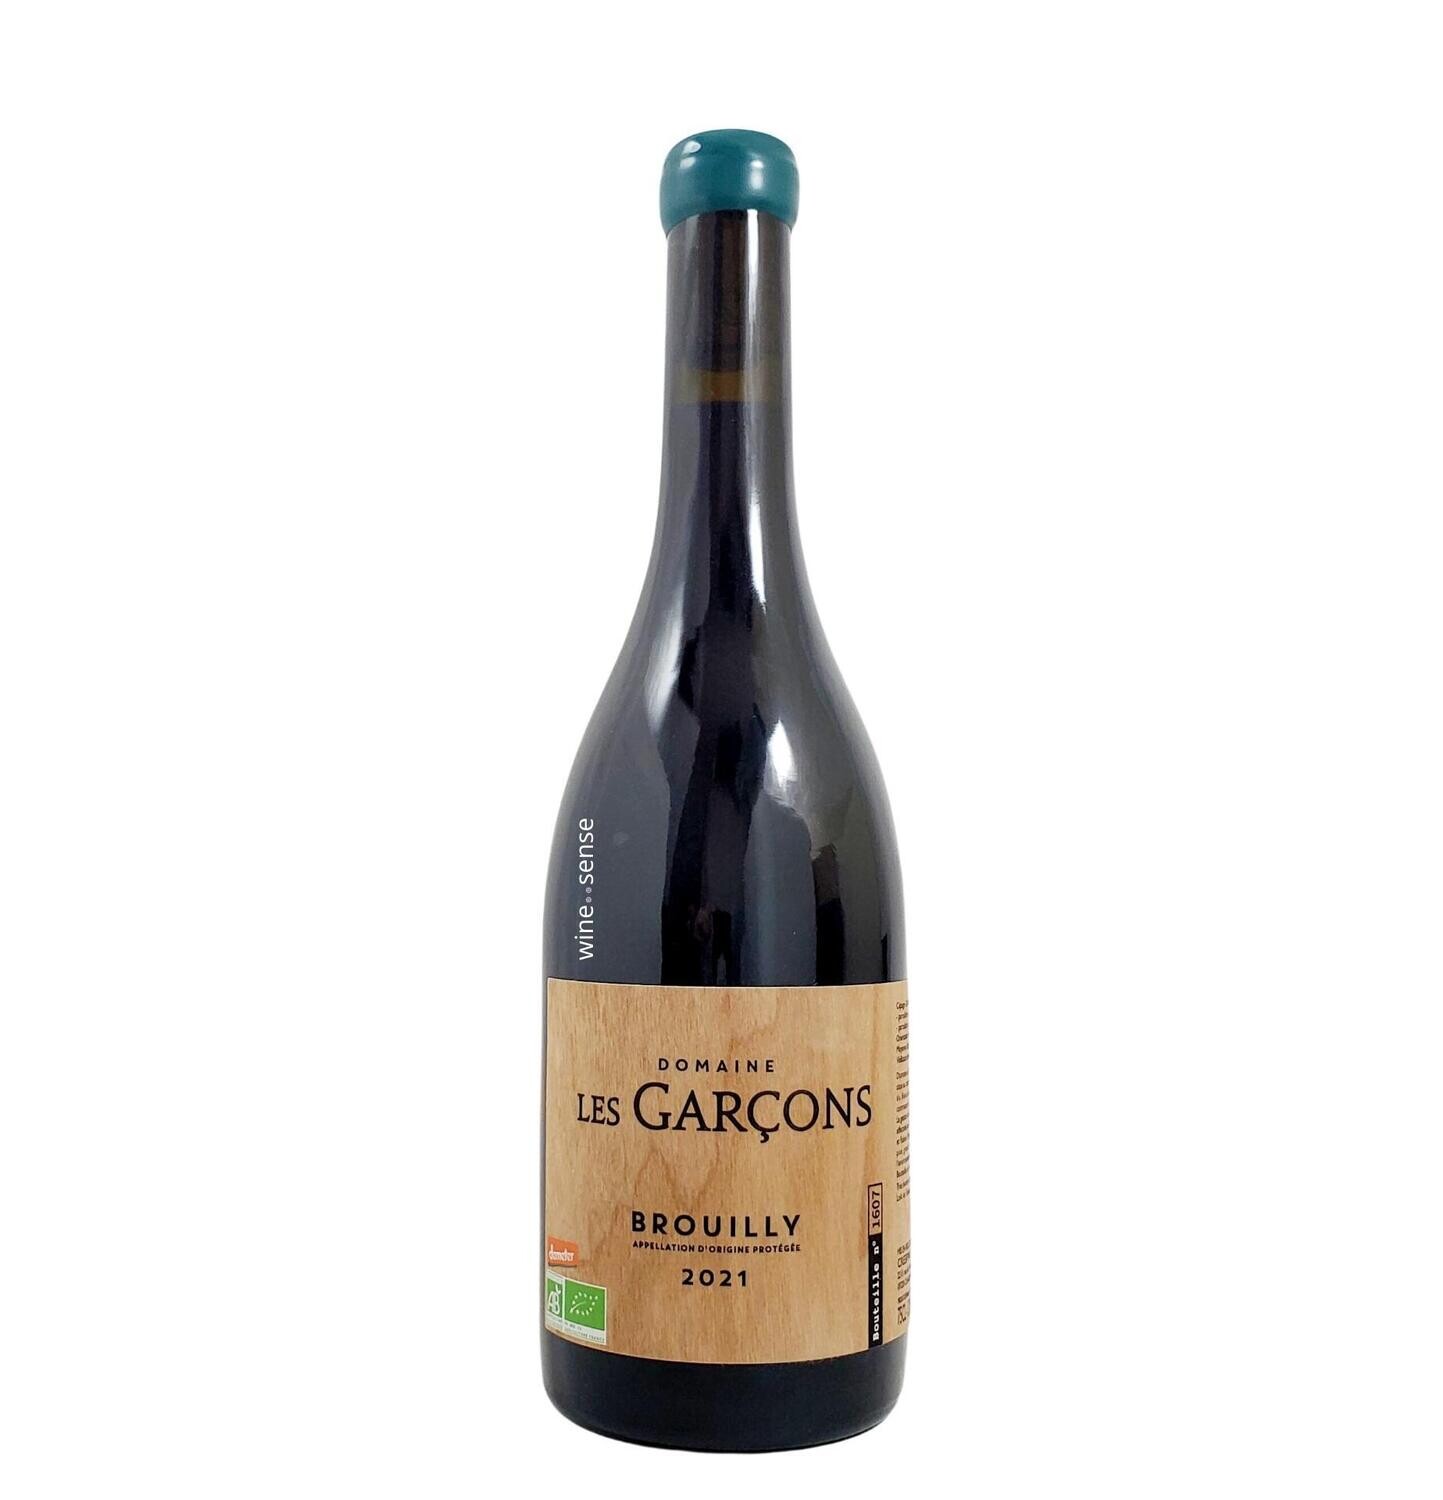 Domaine Les Garcons, Brouilly